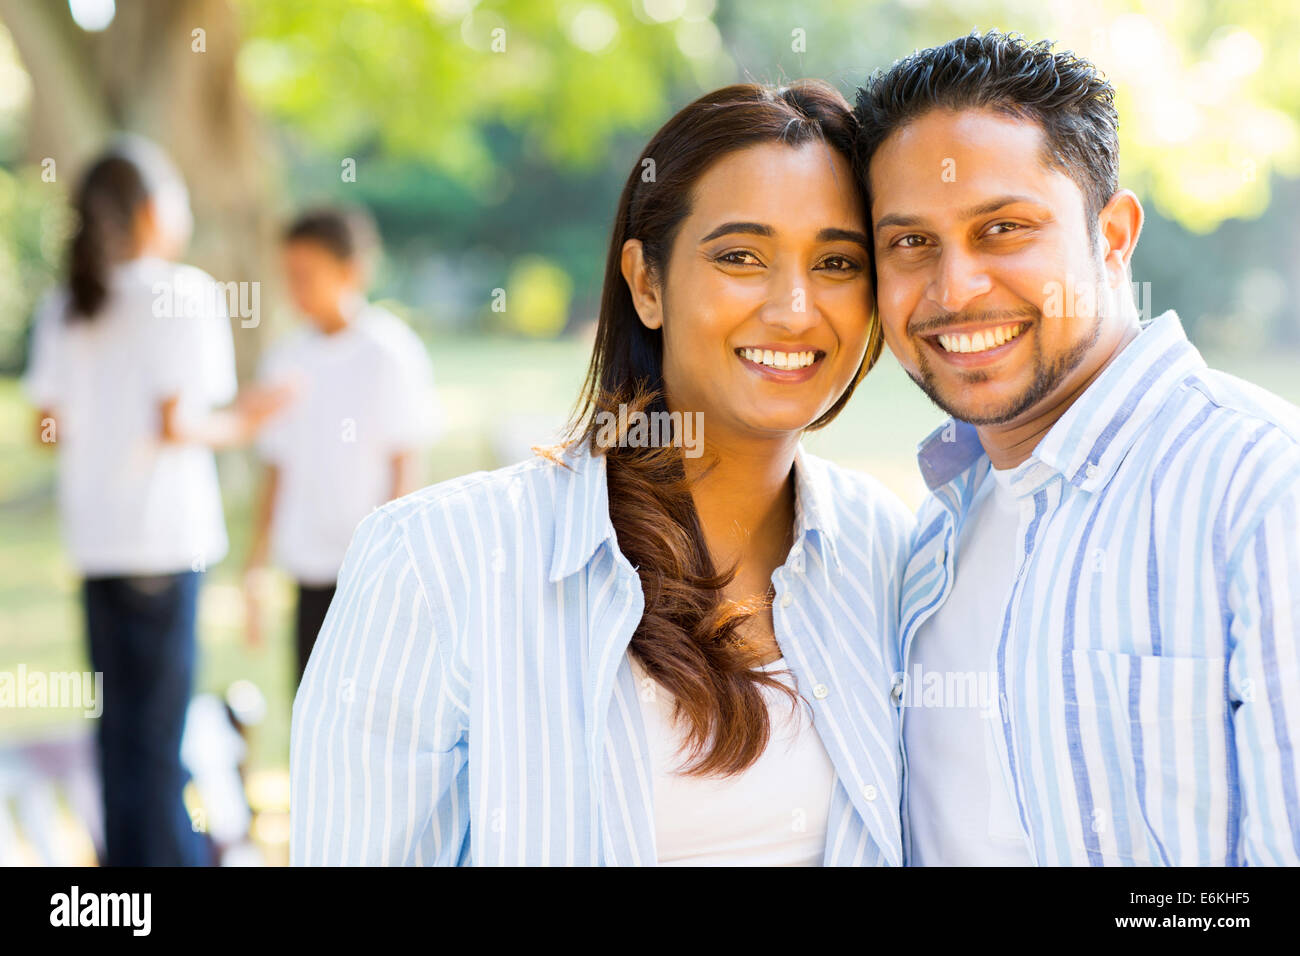 happy Indian couple standing in front of children outdoors Stock Photo